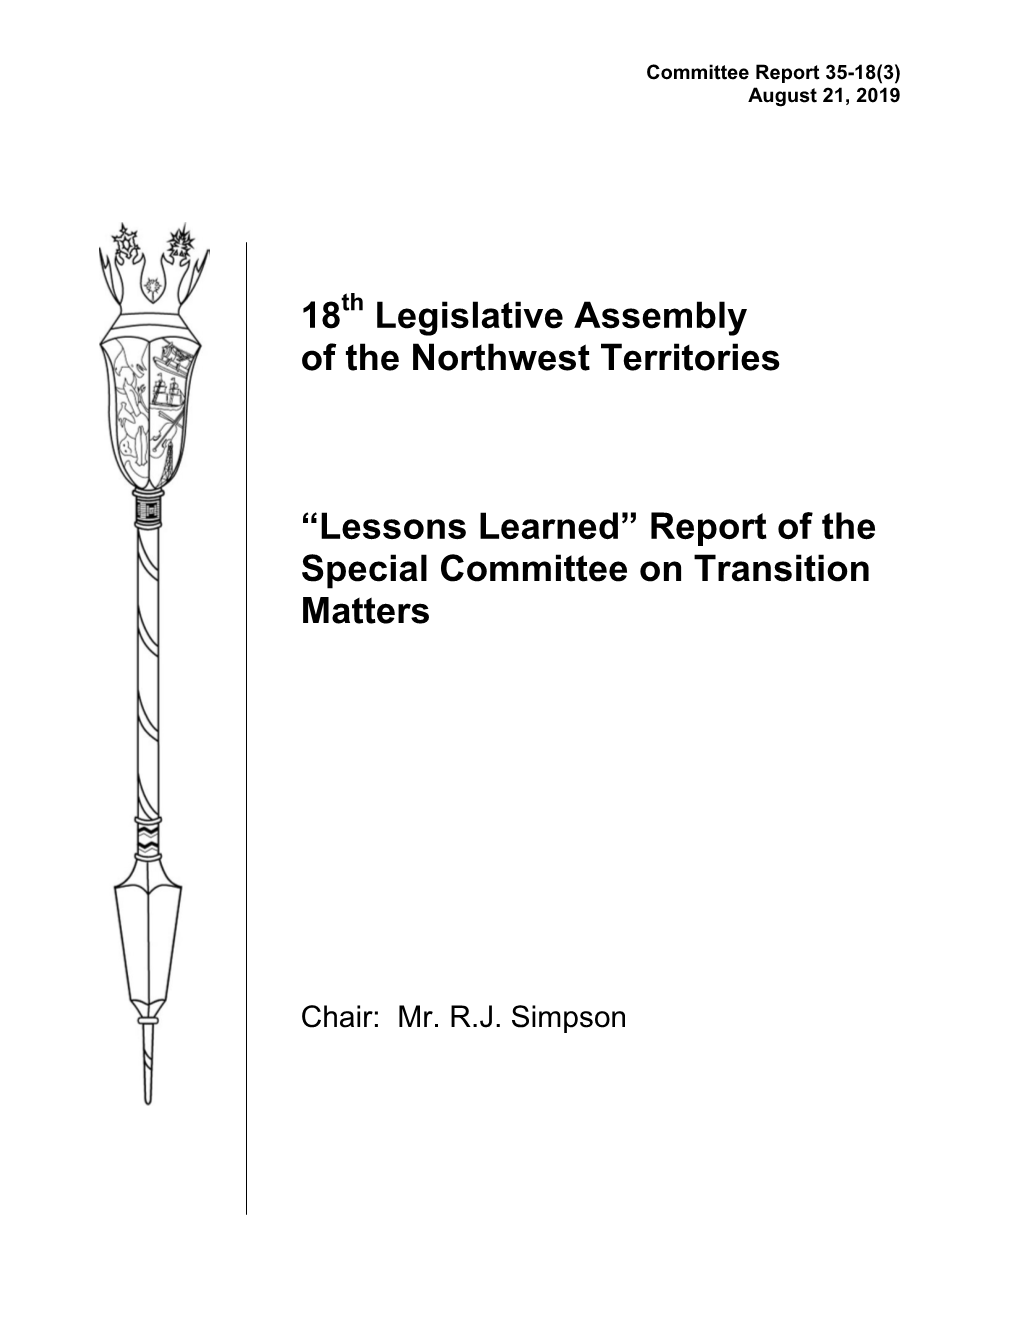 Lessons Learned” Report of the Special Committee on Transition Matters